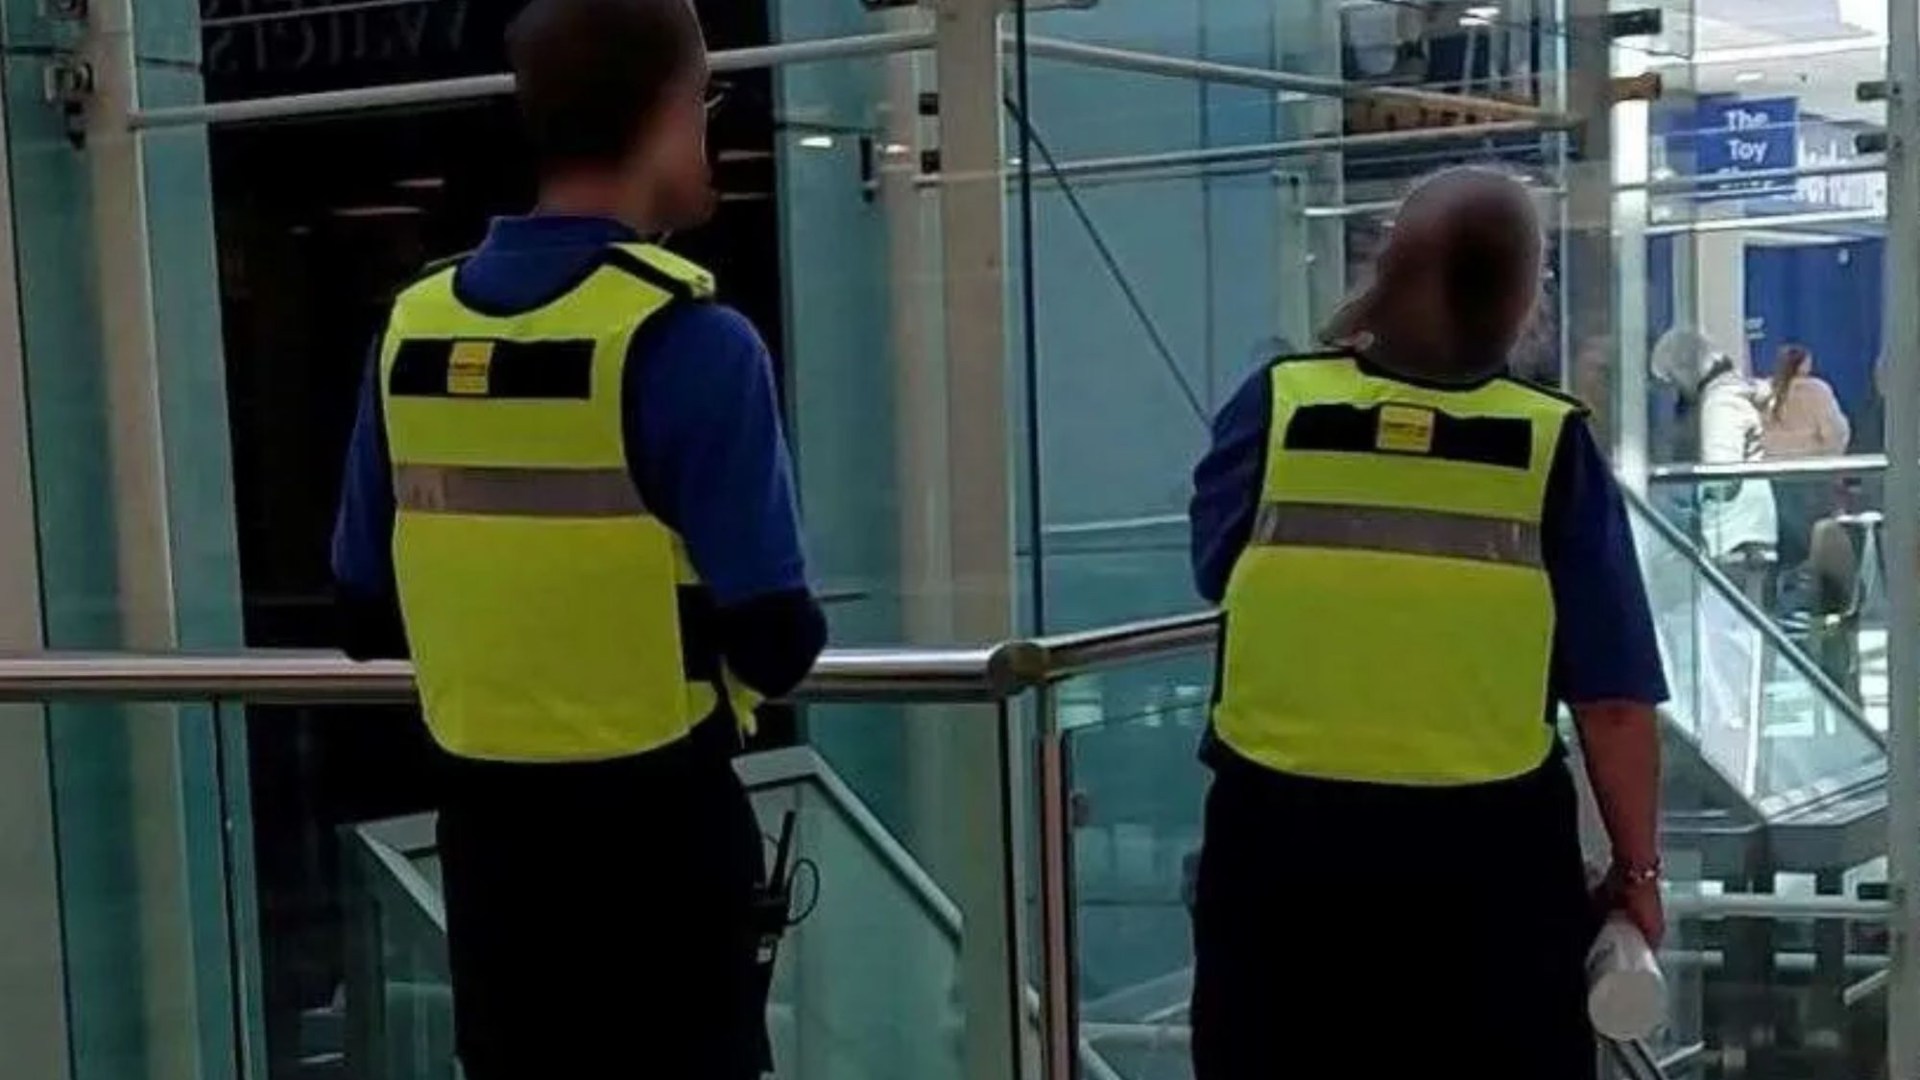 Kent shopping centre staff equipped with £600 stab vests after brutal assaults